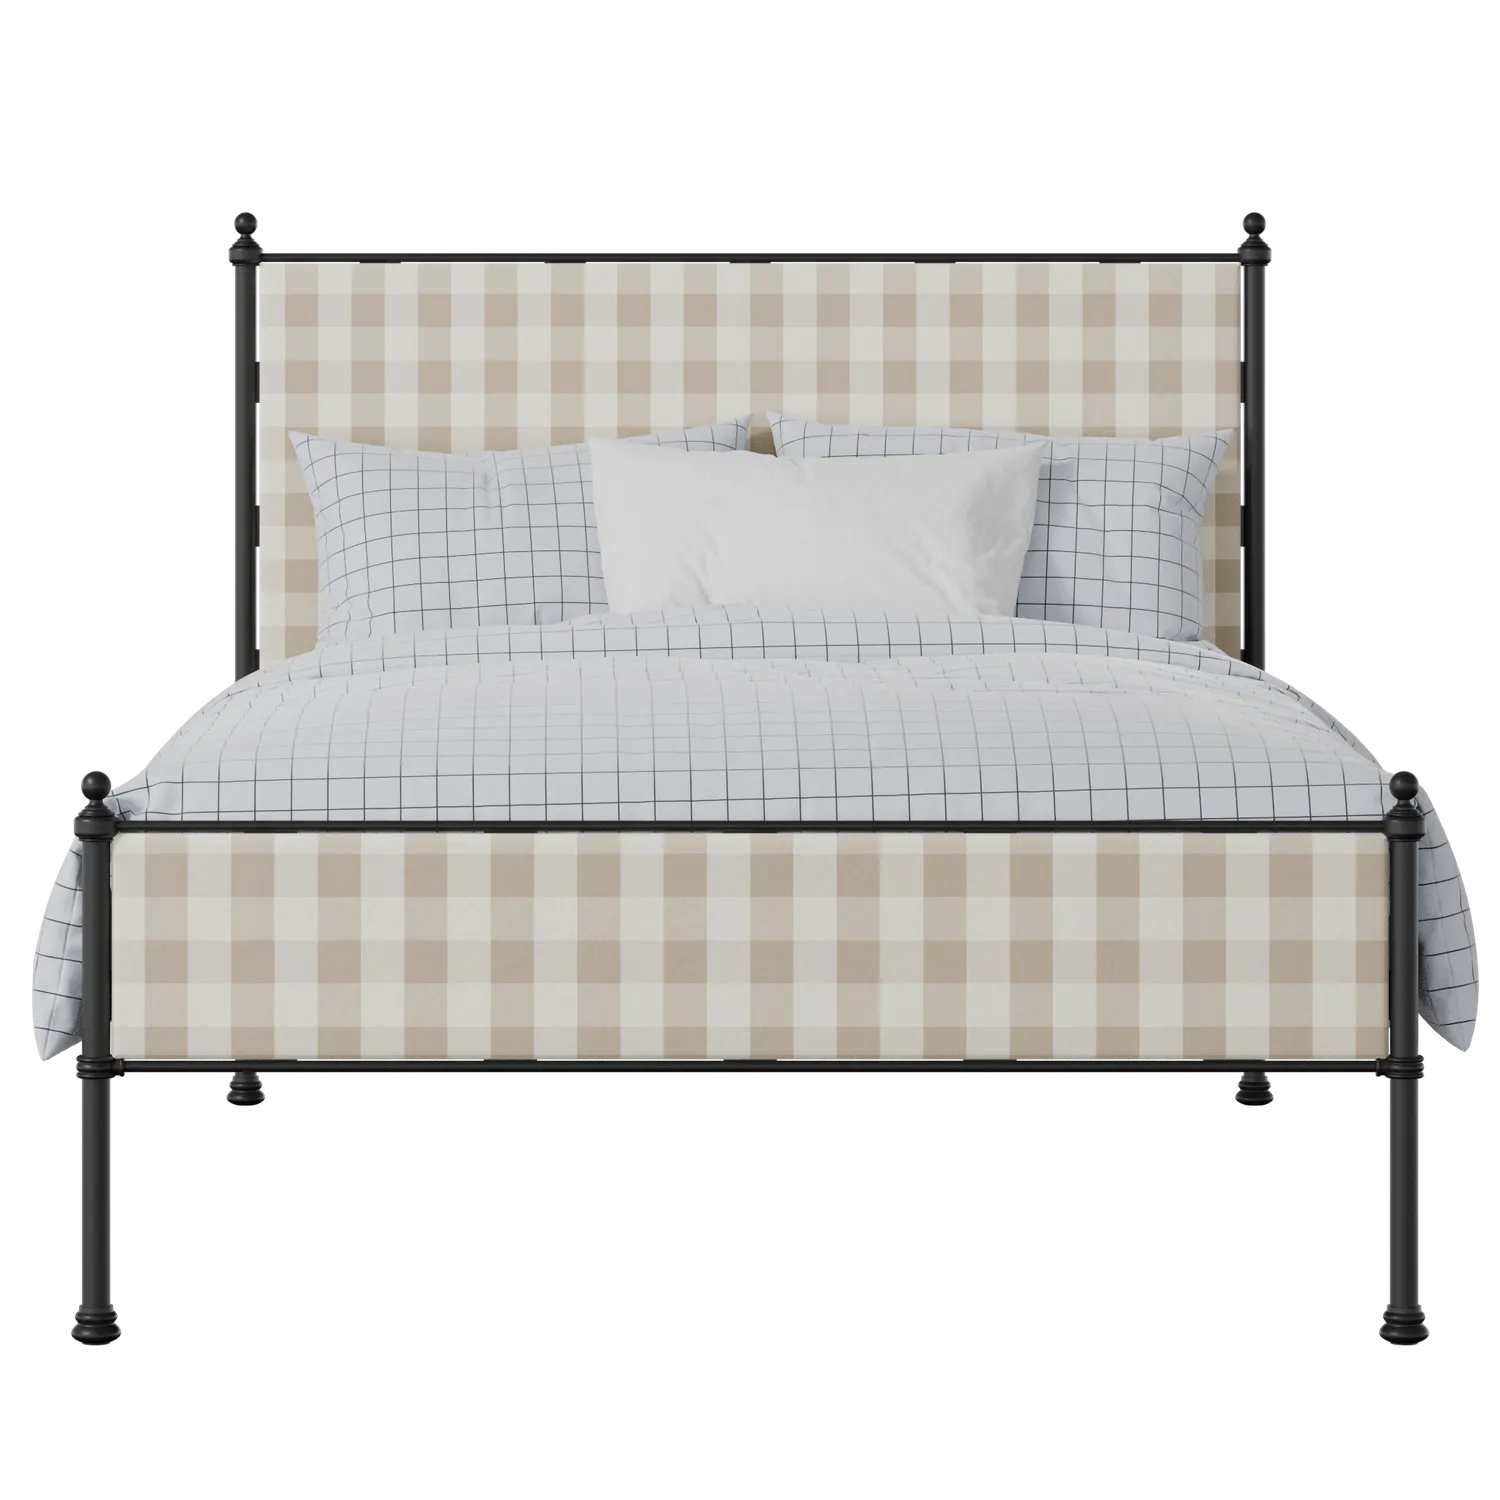 Neville Slim iron/metal upholstered bed in black with Romo Kemble Putty fabric